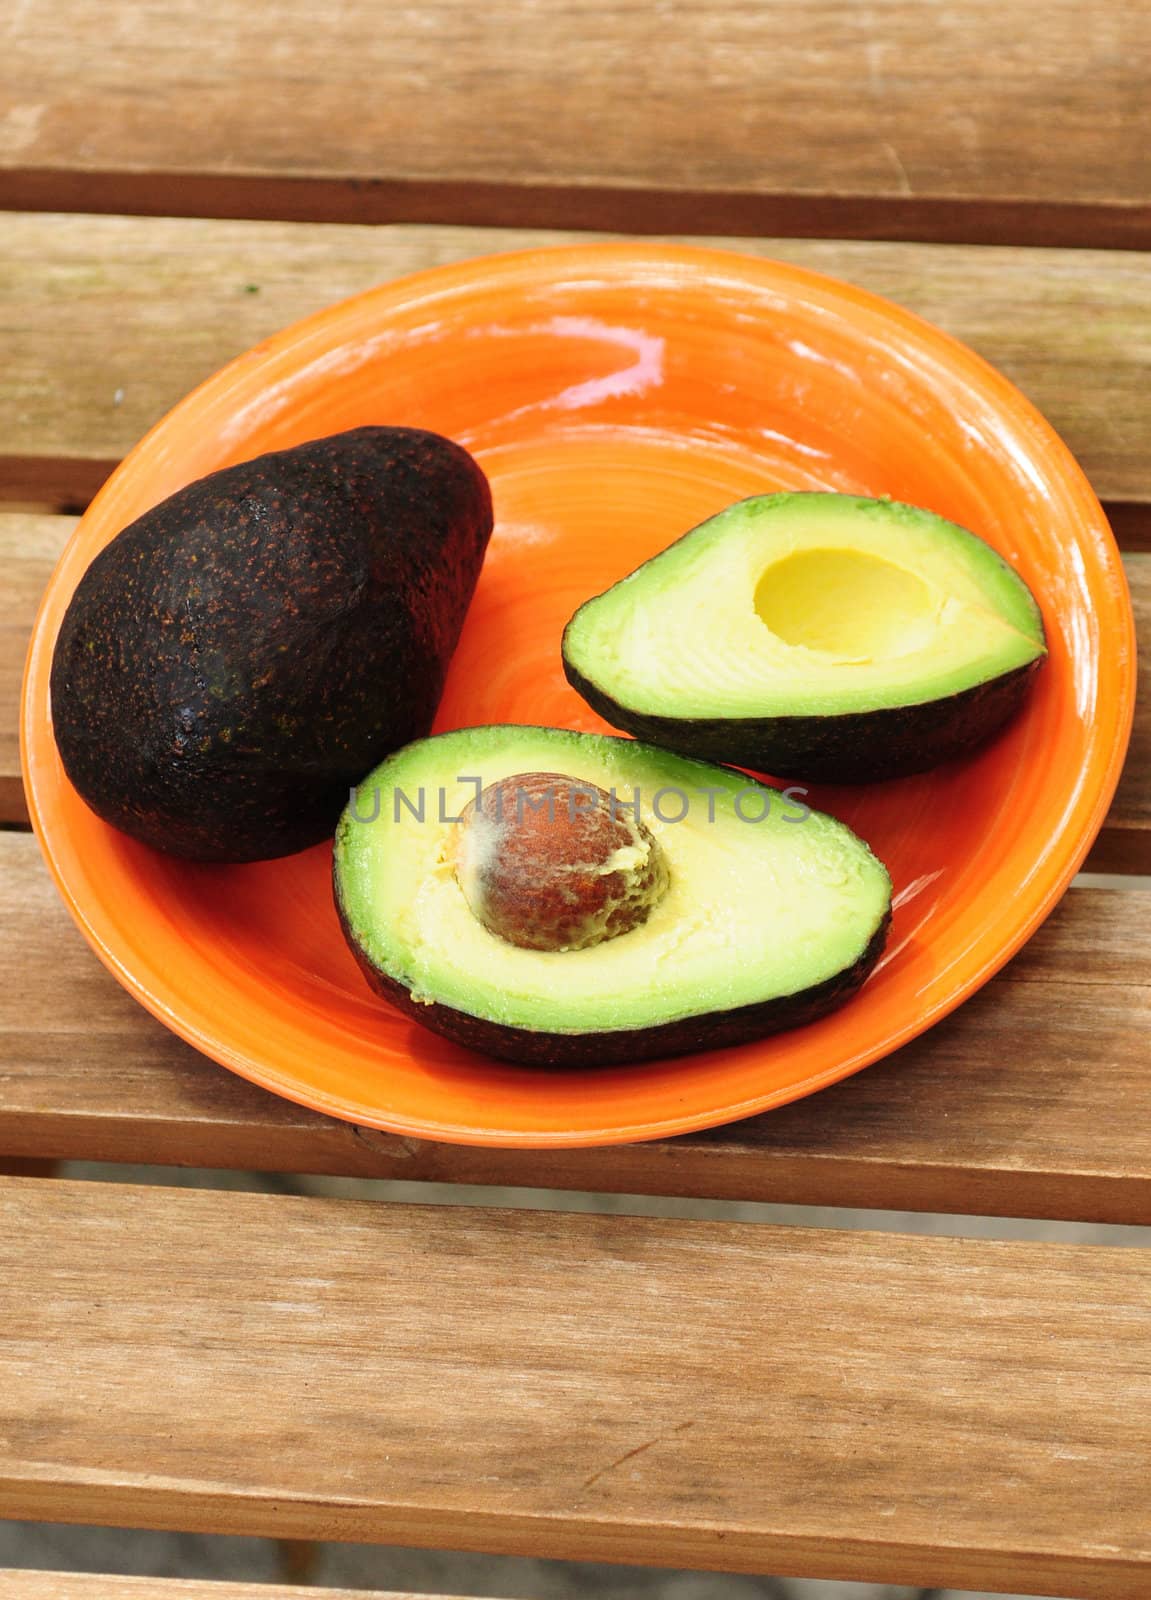 One whole and one sliced avocado on an orange plate with wood background